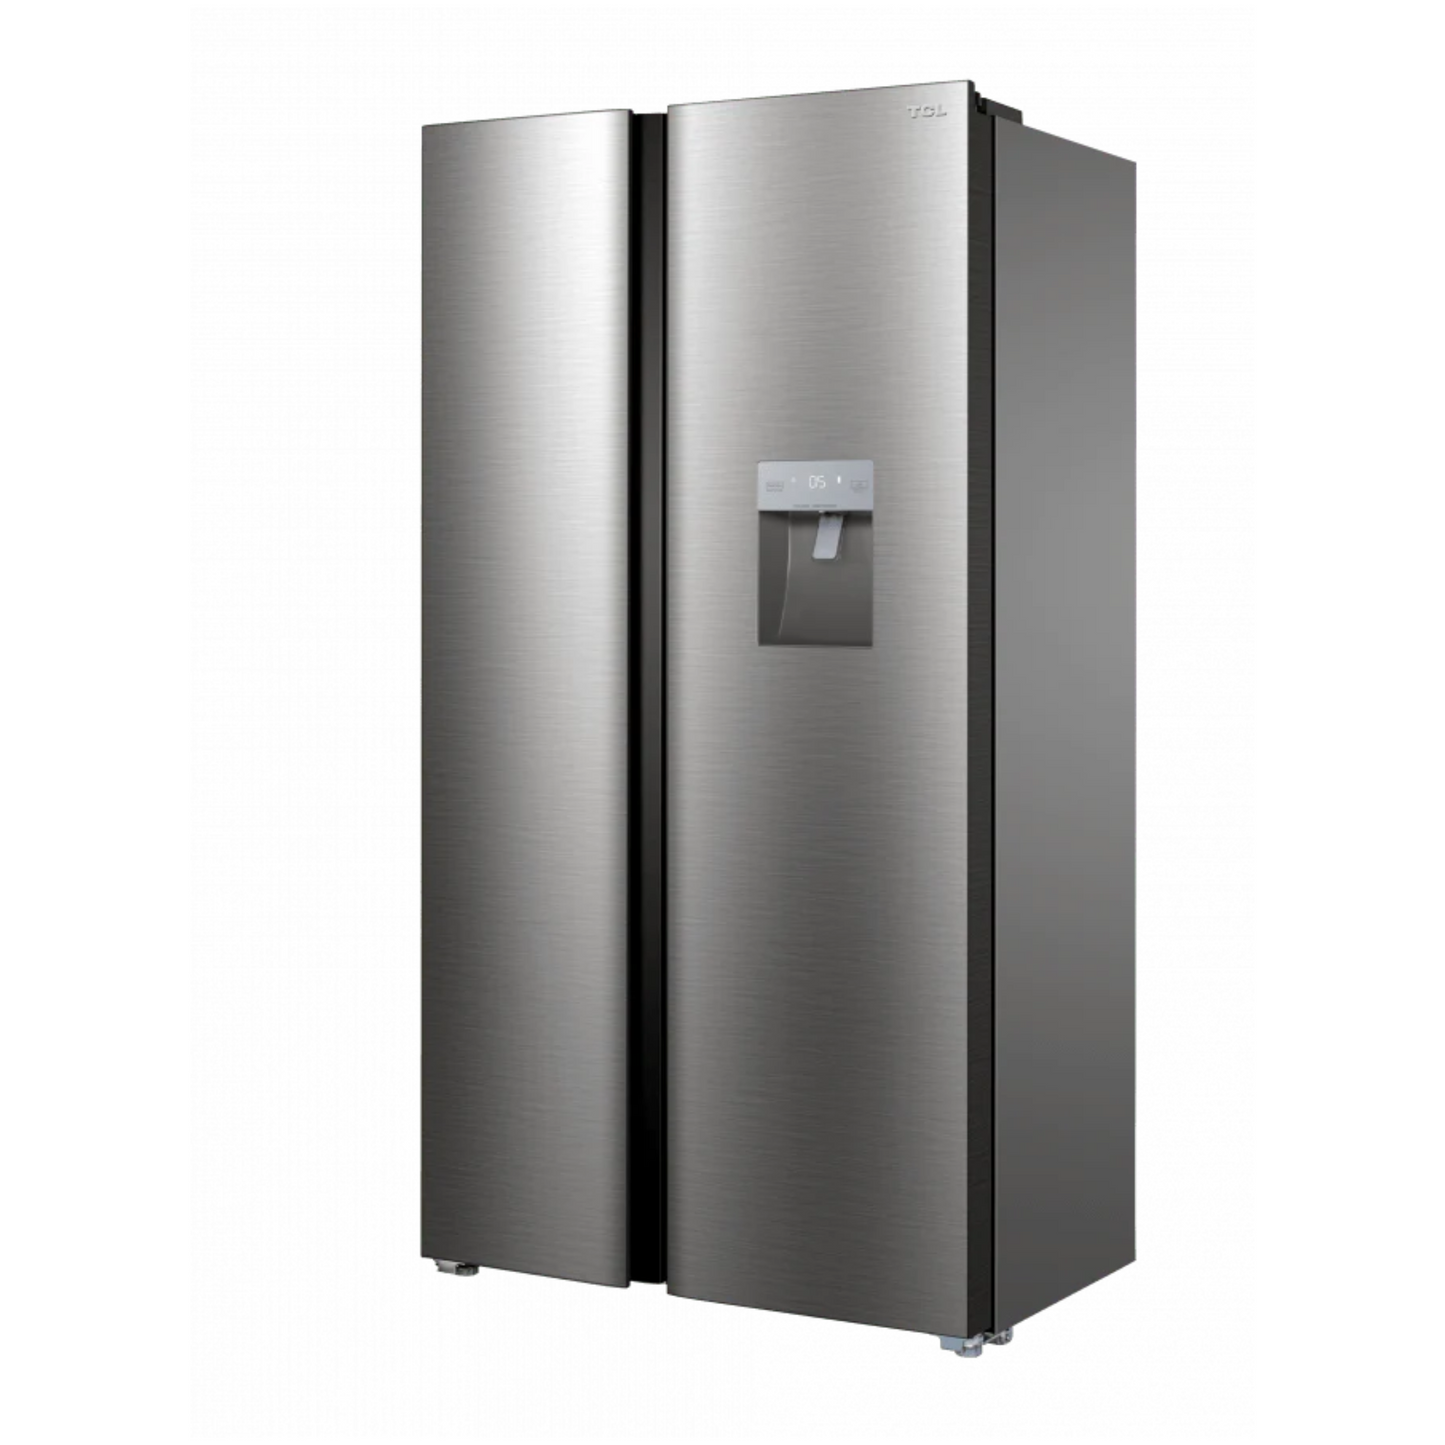 TCL 700L Eco Inverter Side by Side Refrigerator, P790SBSNWD